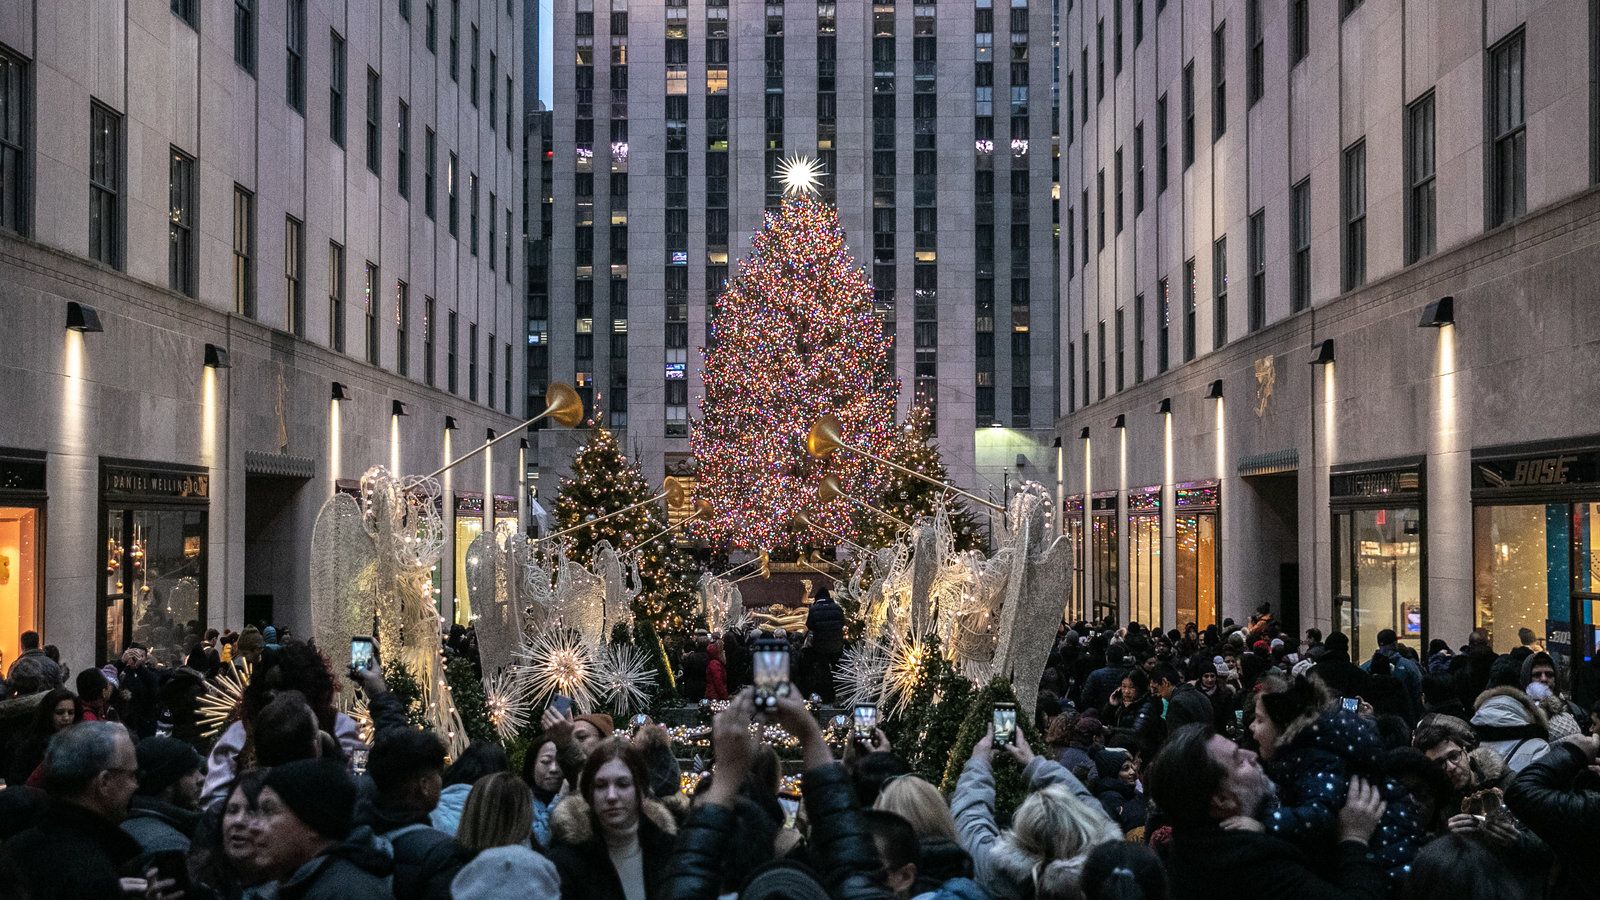 To Help Holiday Crowds, New York to Close Streets Near Rockefeller Center